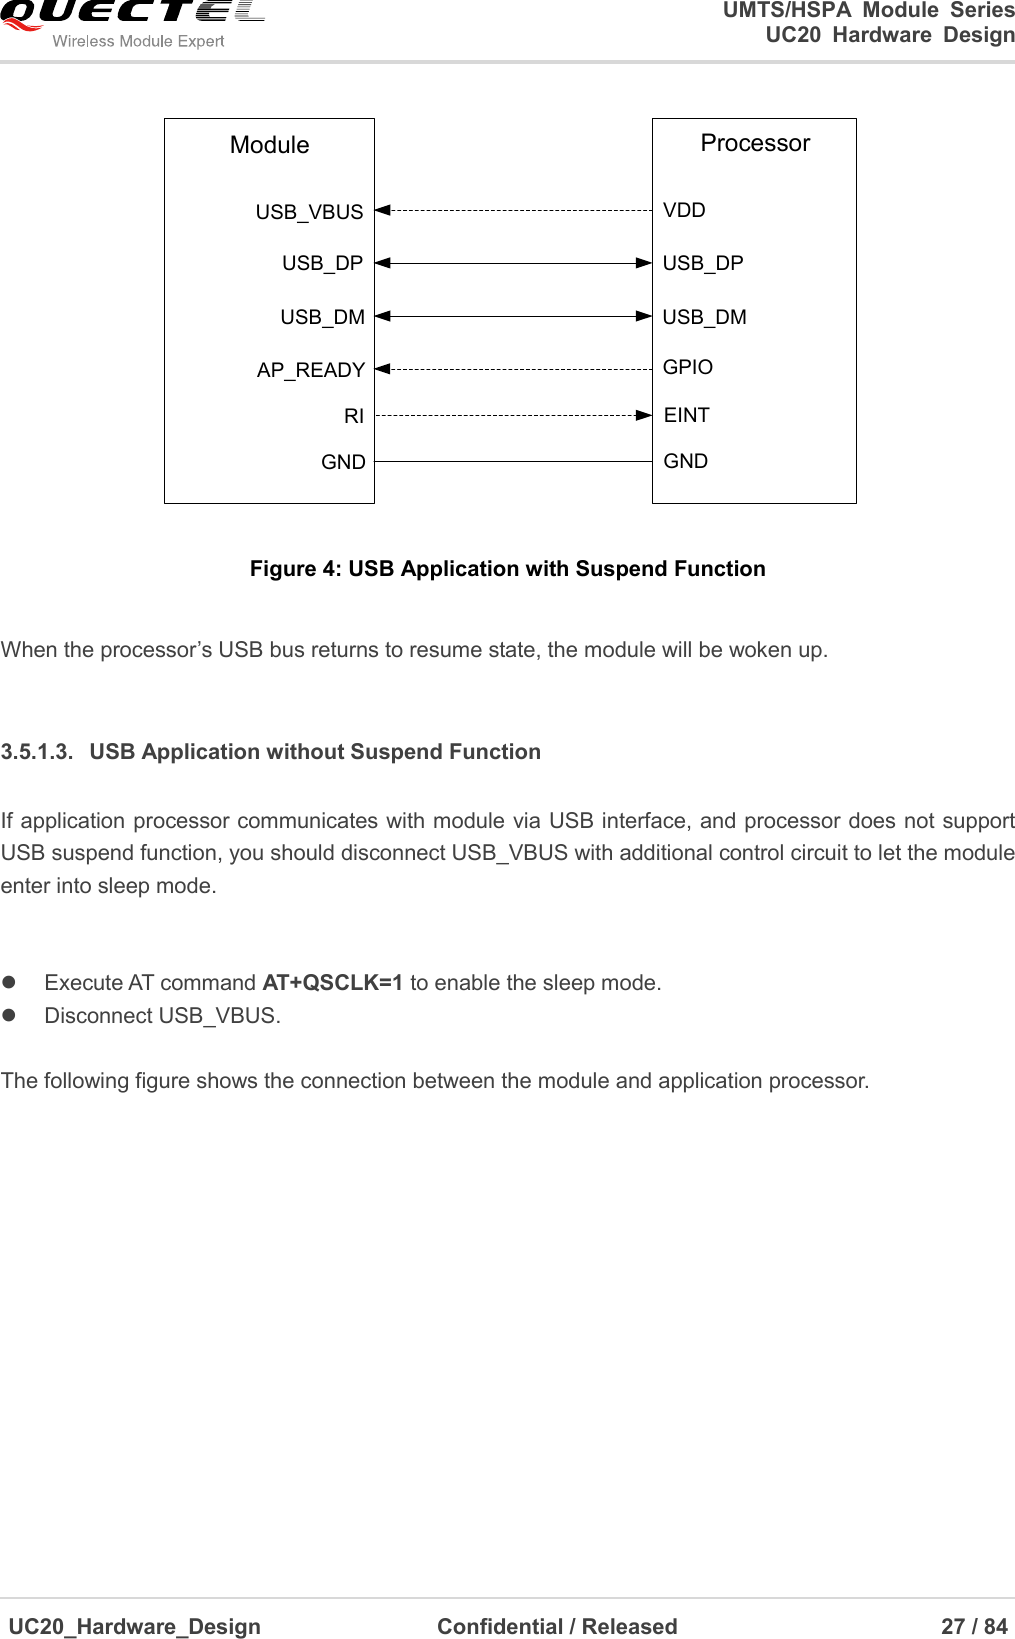                                                                                                                                               UMTS/HSPA  Module  Series                                                                 UC20  Hardware  Design  UC20_Hardware_Design                  Confidential / Released                            27 / 84     USB_VBUSUSB_DPUSB_DMAP_READYVDDUSB_DPUSB_DMGPIOModule ProcessorGND GNDRI EINT Figure 4: USB Application with Suspend Function  When the processor’s USB bus returns to resume state, the module will be woken up.  3.5.1.3.  USB Application without Suspend Function If application processor communicates with module via USB interface, and processor does not support USB suspend function, you should disconnect USB_VBUS with additional control circuit to let the module enter into sleep mode.     Execute AT command AT+QSCLK=1 to enable the sleep mode.   Disconnect USB_VBUS.  The following figure shows the connection between the module and application processor. 